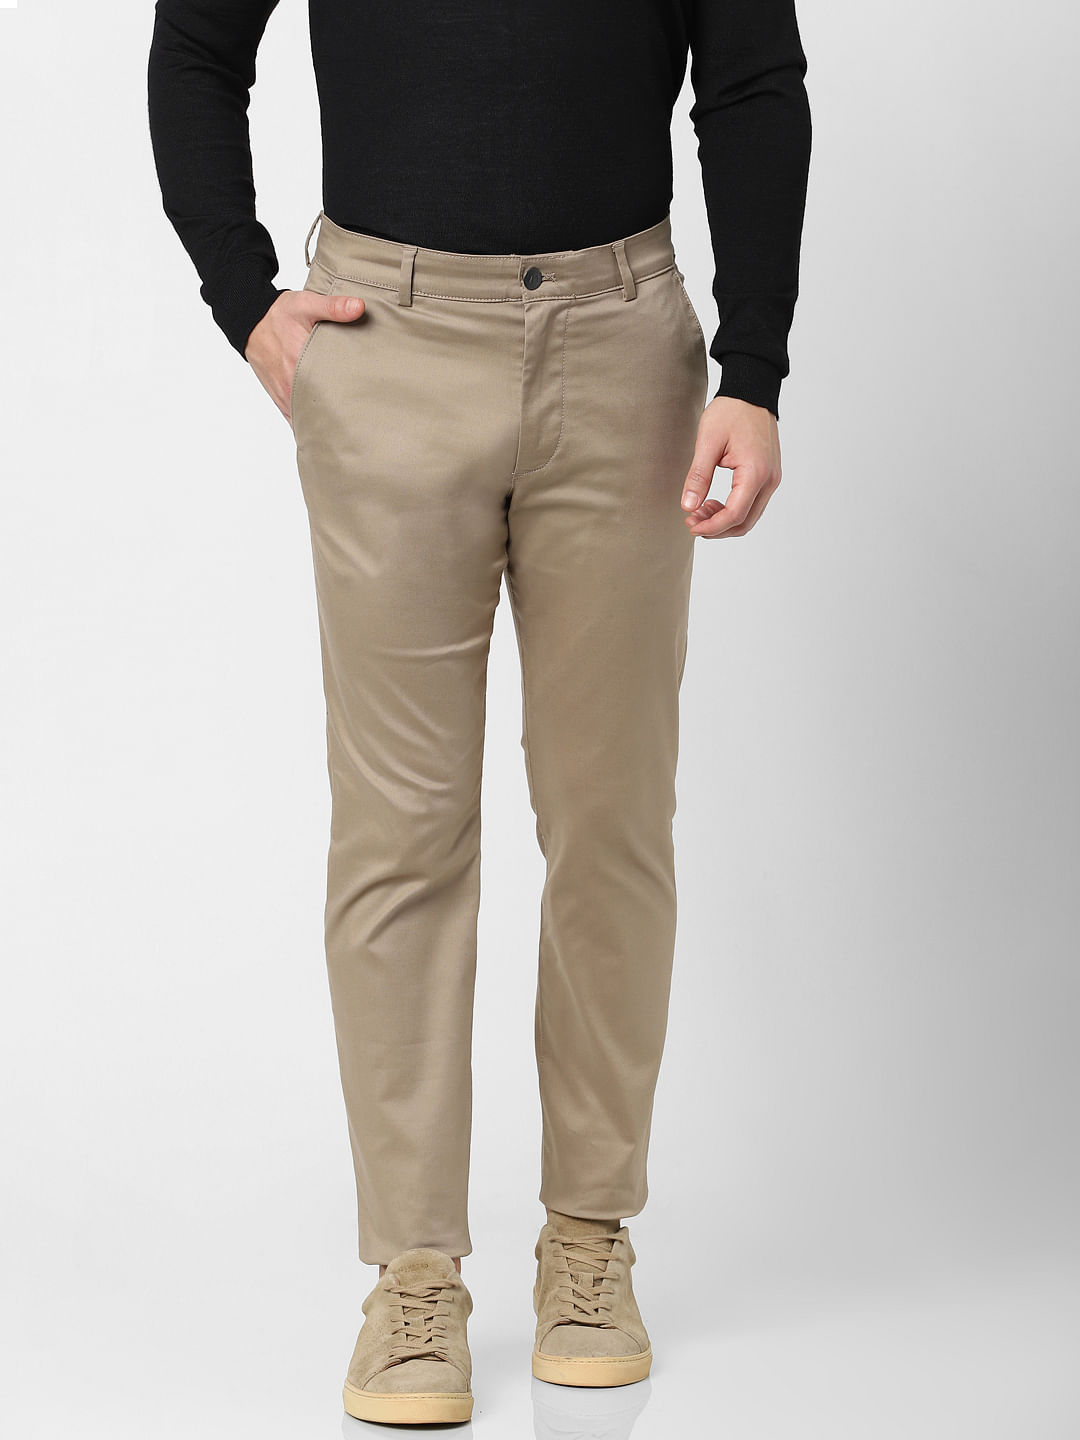 Share more than 78 slim fit pants online super hot